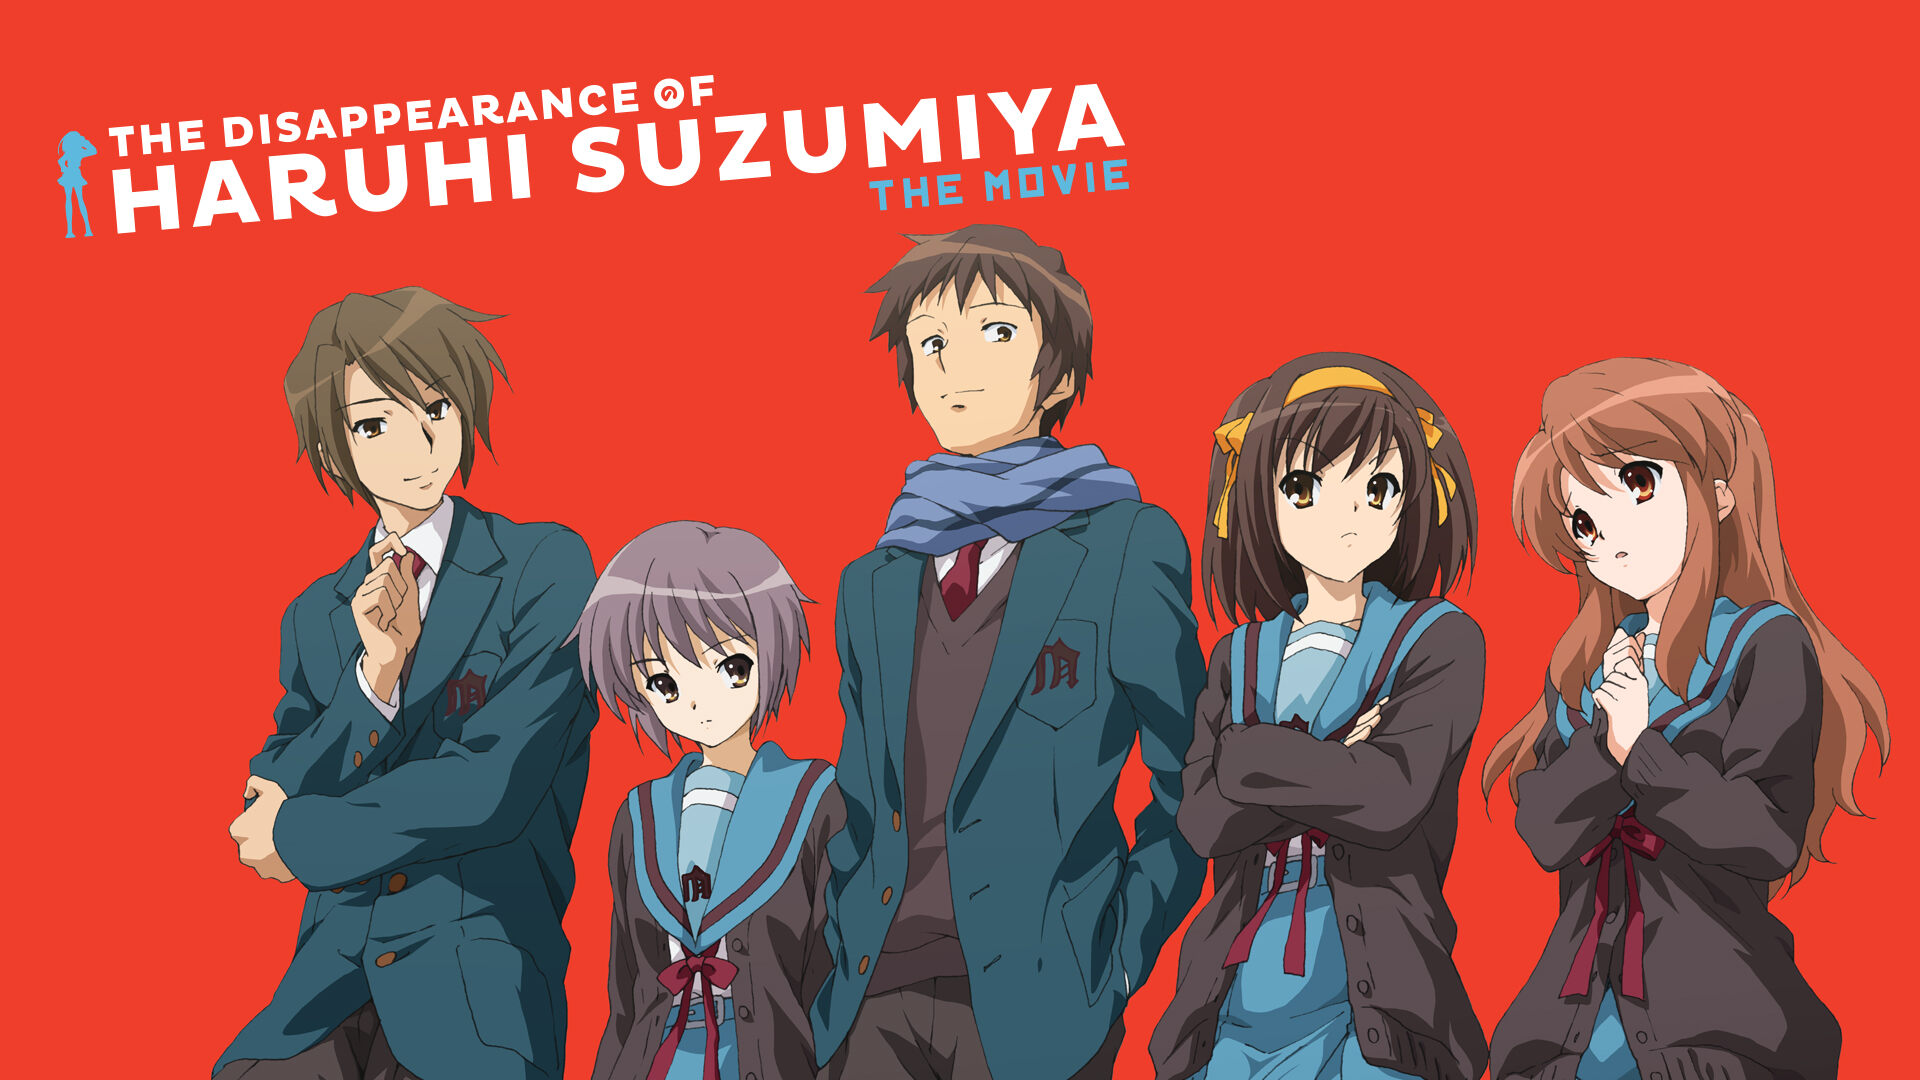 44-facts-about-the-movie-the-disappearance-of-haruhi-suzumiya